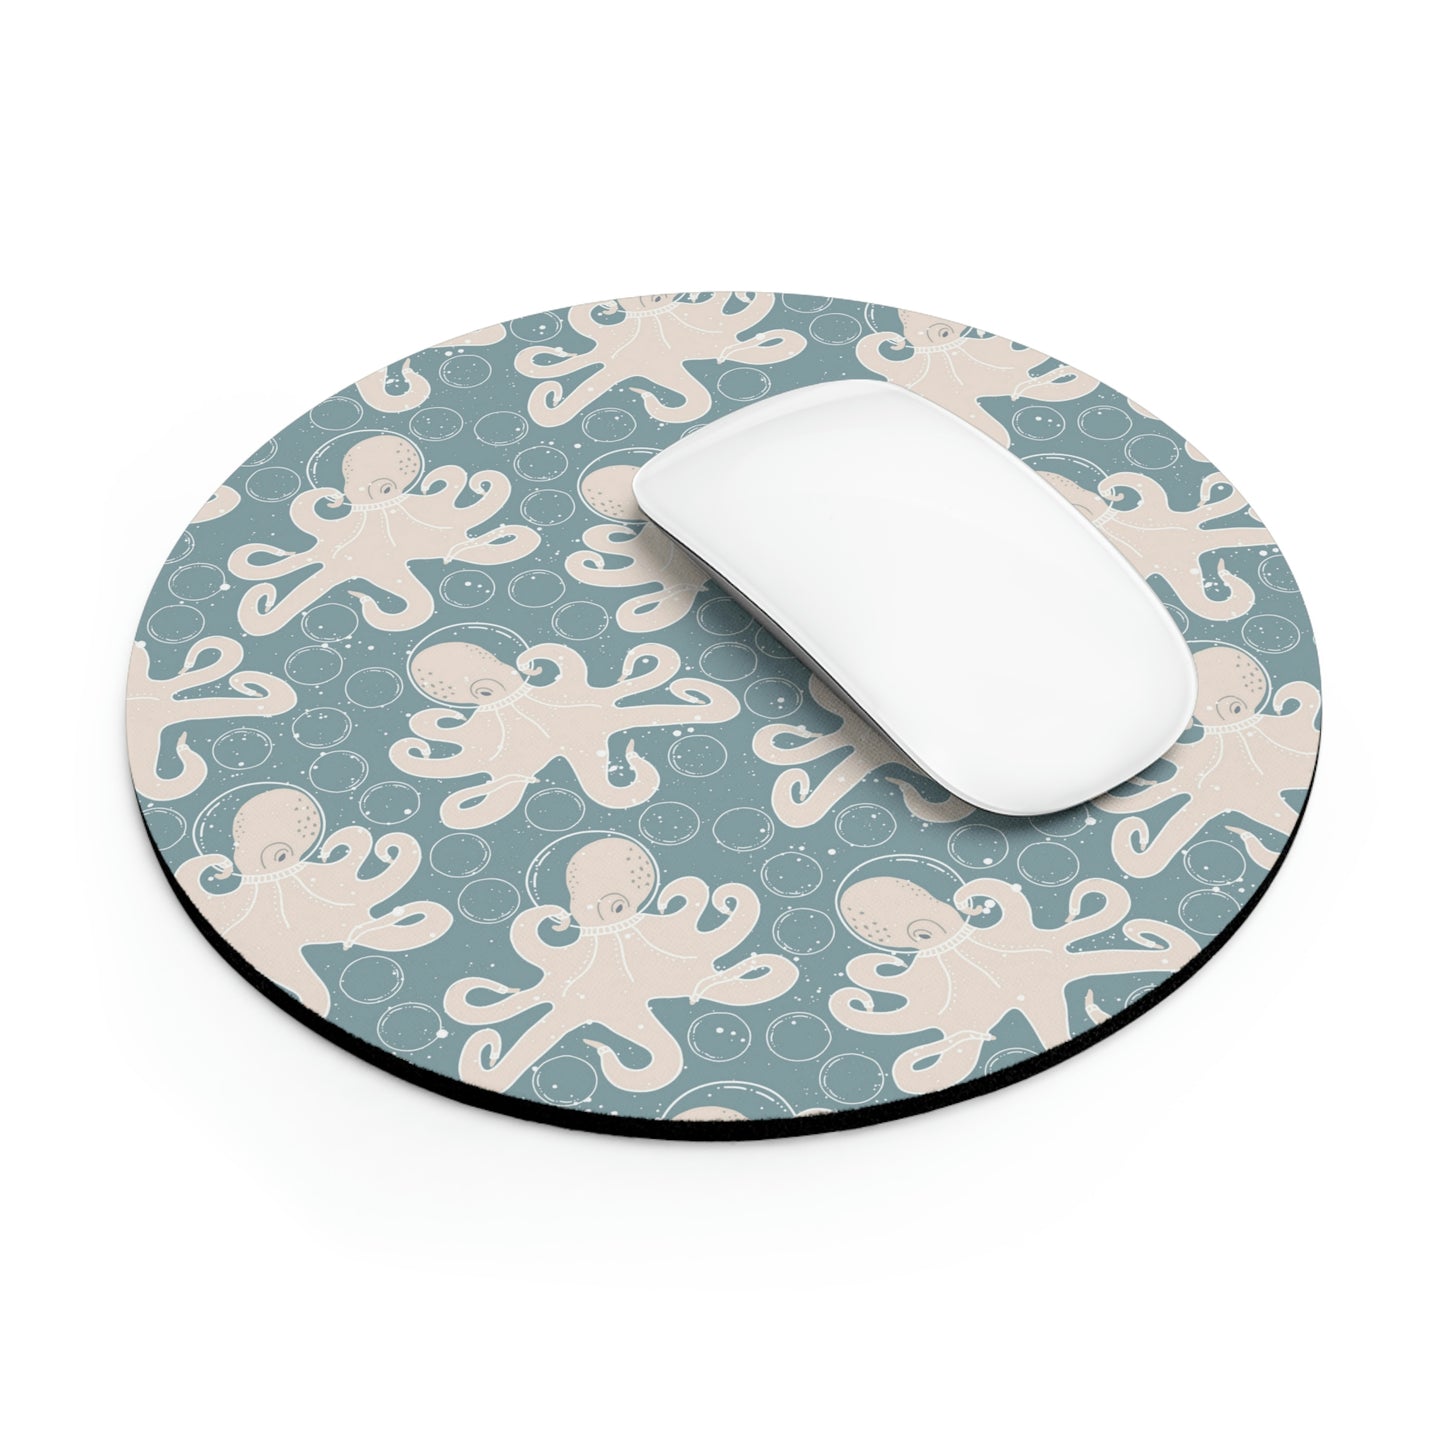 Space Octopus Mousepad